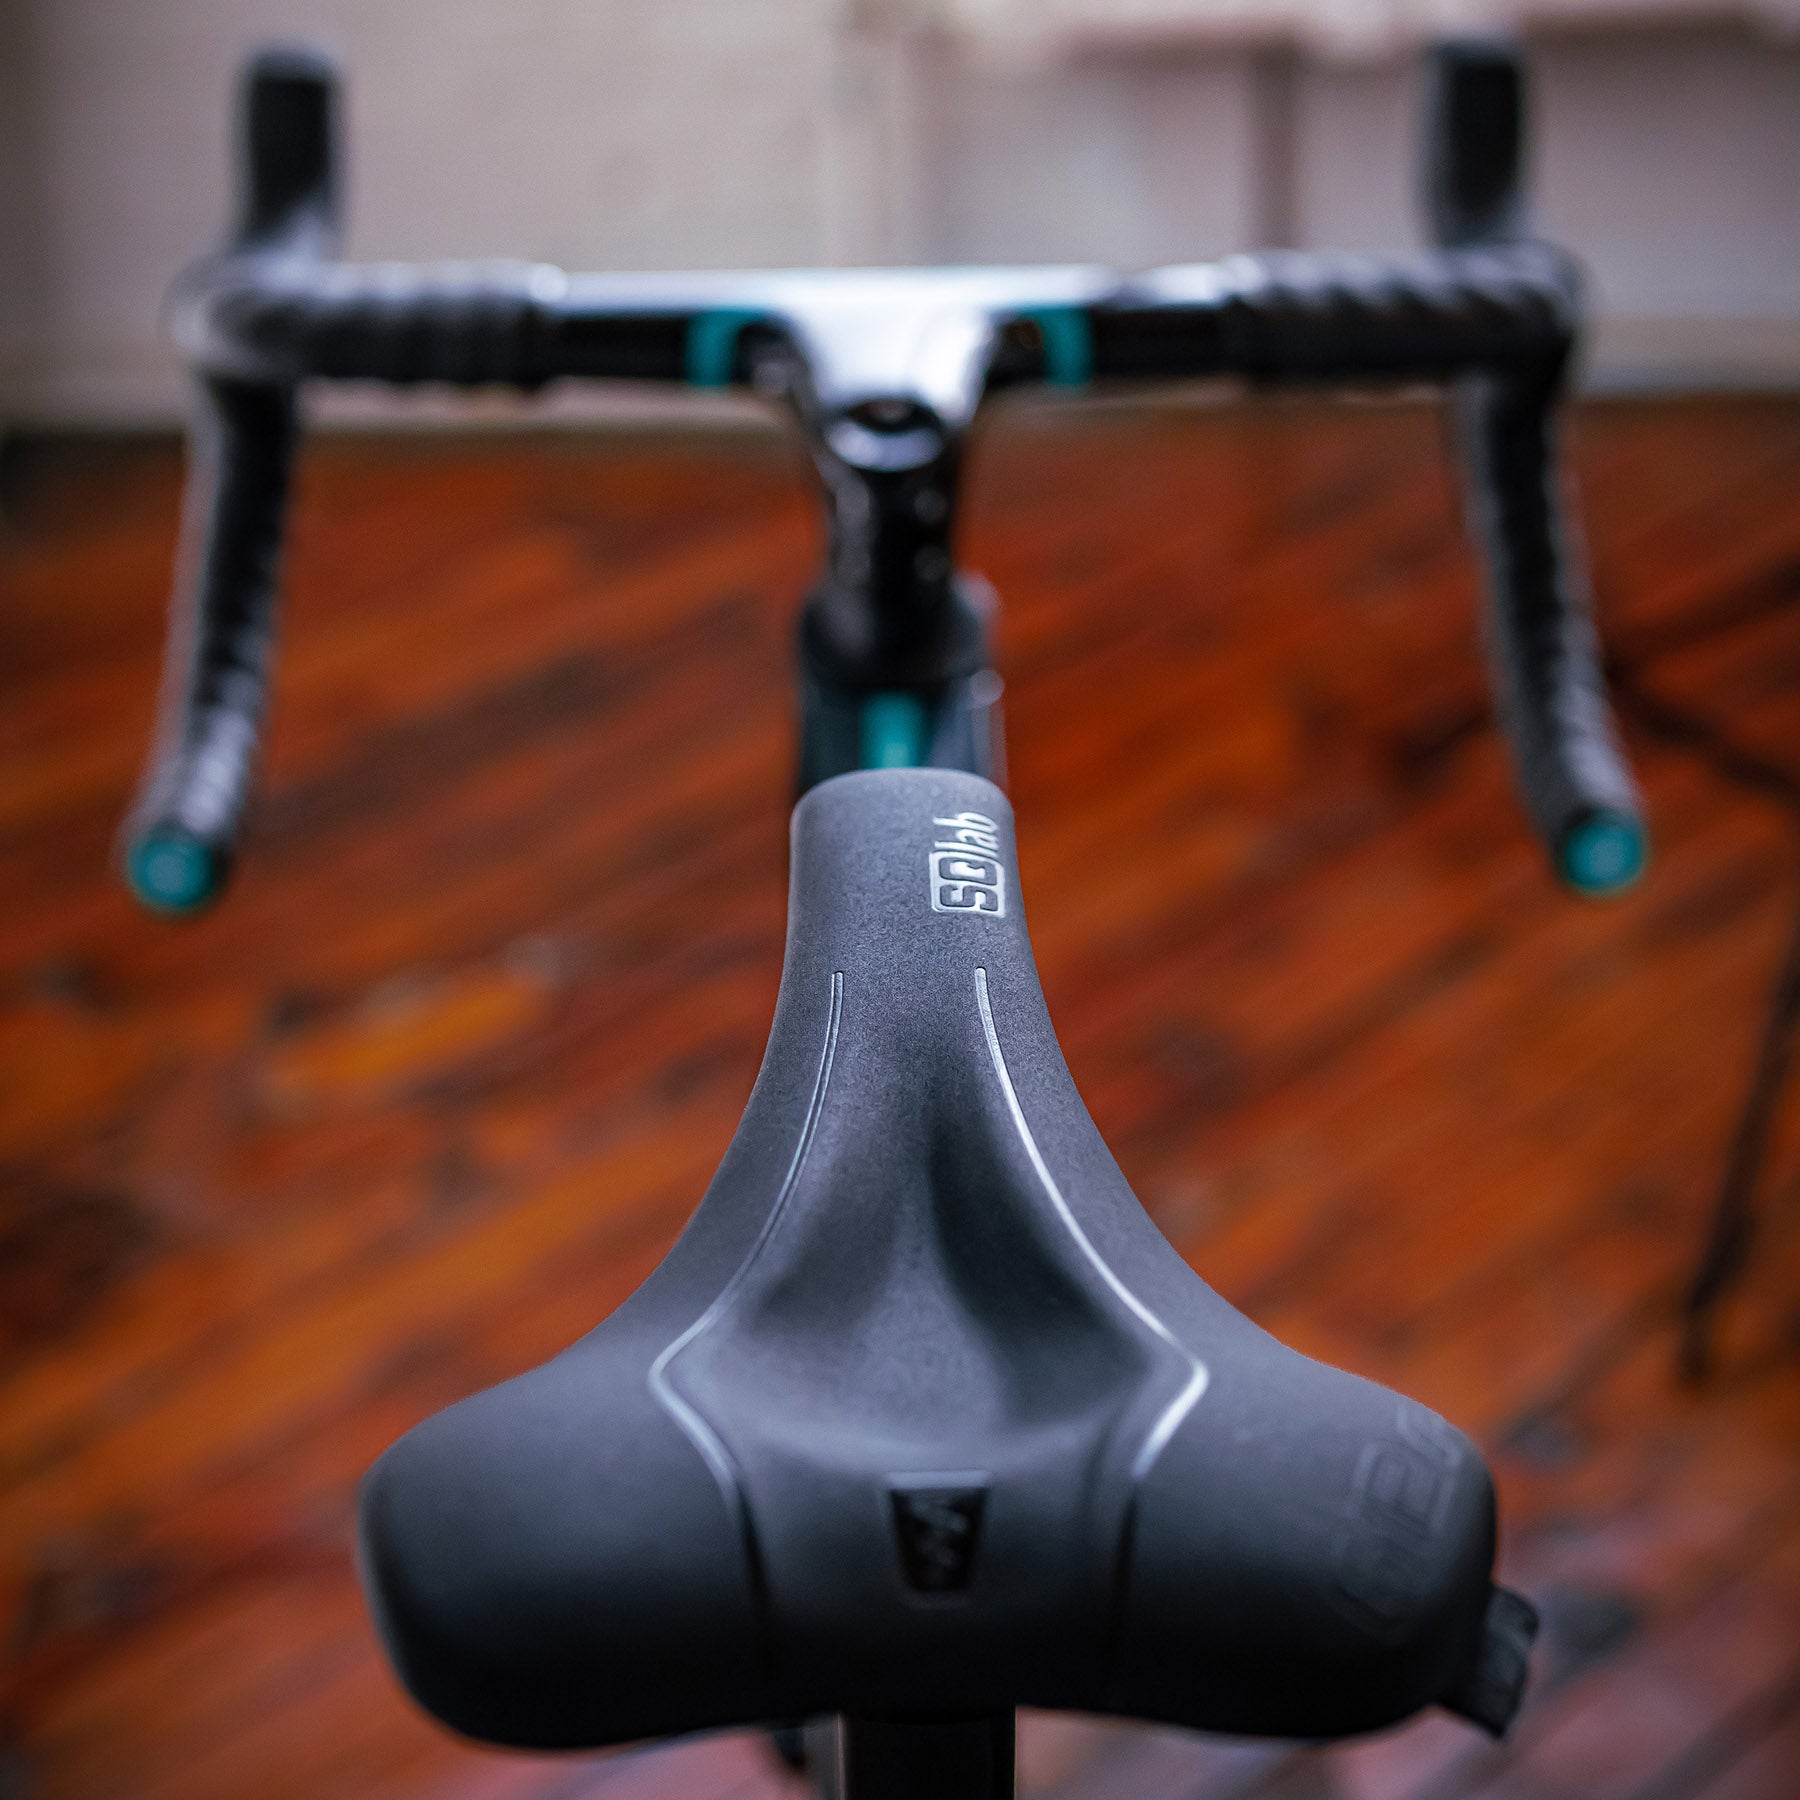 Image features back angle shot of the seat on the Chapter 2 TOA bike